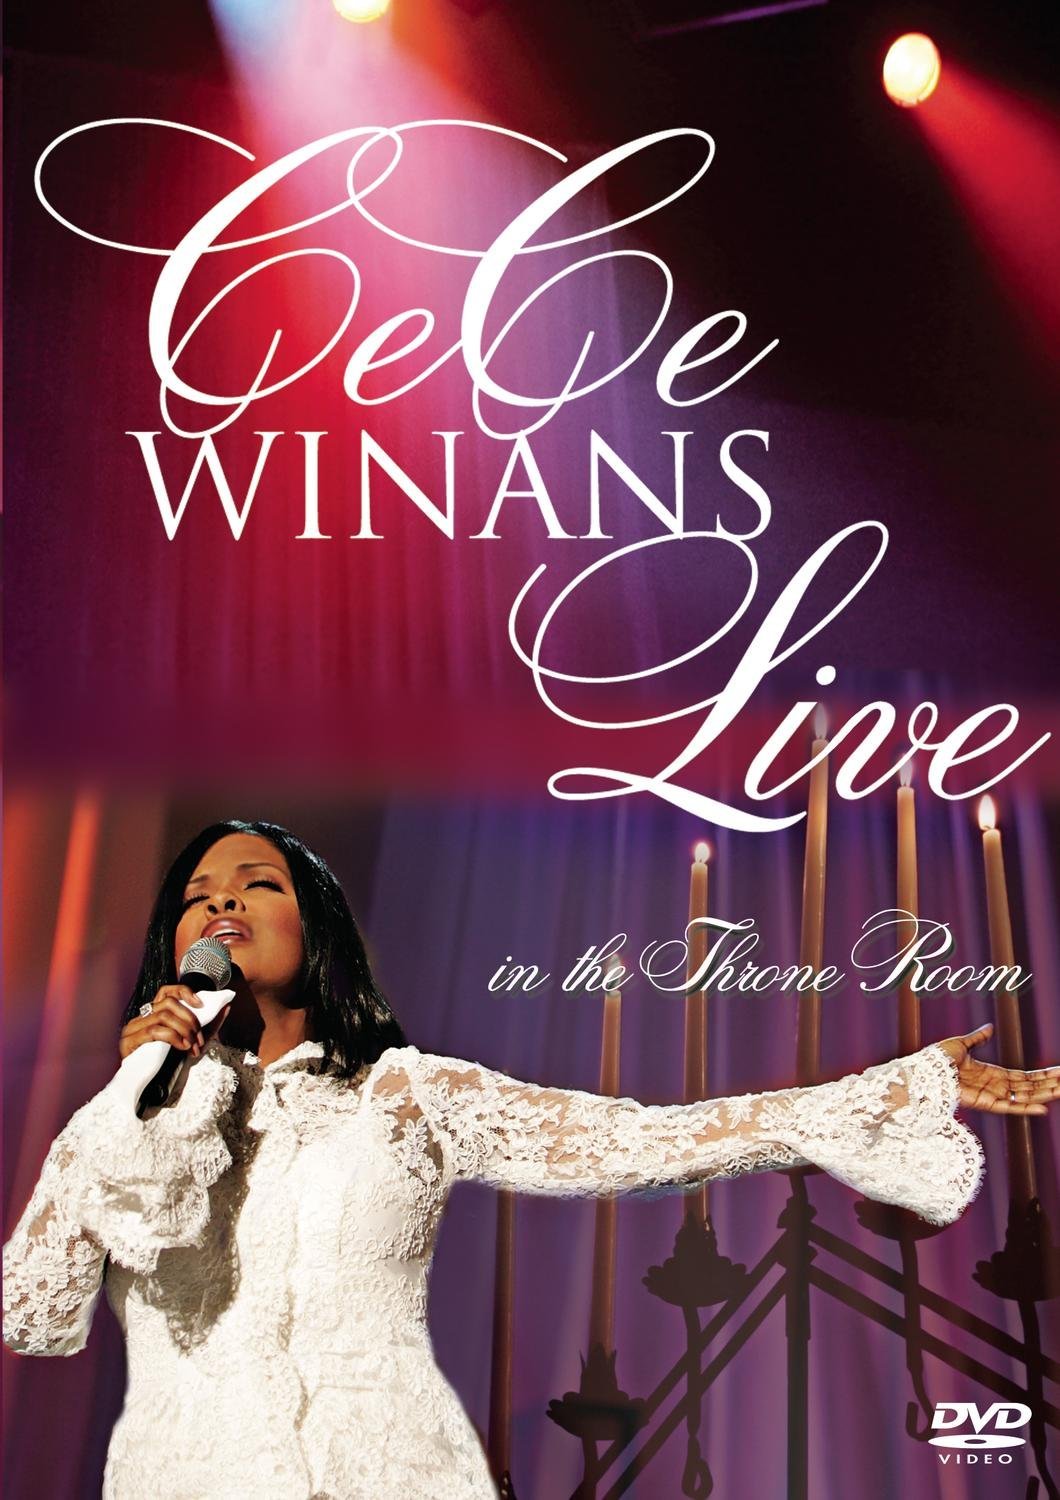 Cece Winans - Live in the Throne Room (DVD)